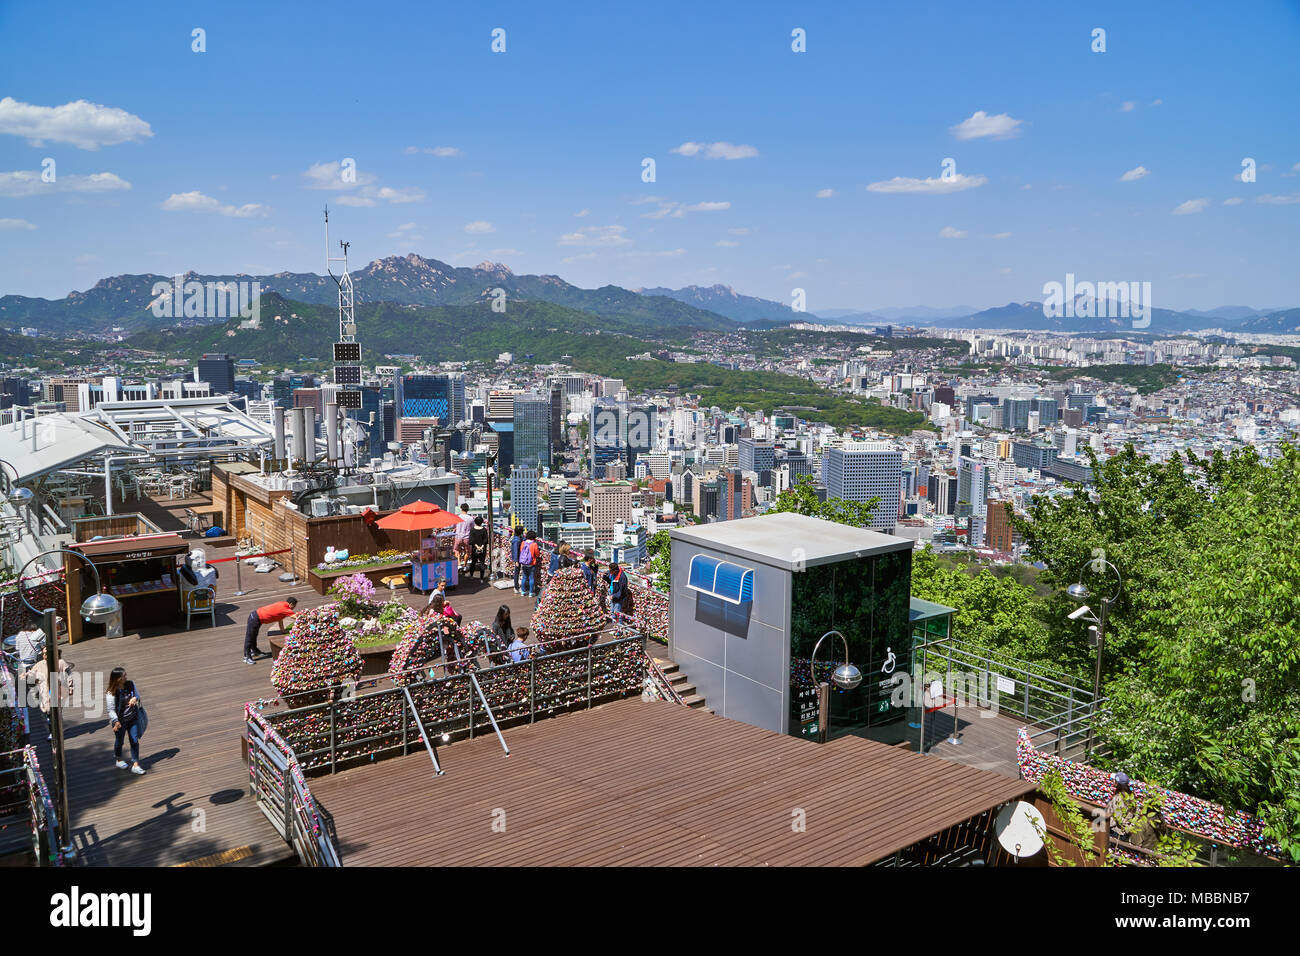 Seoul, Korea - April 26, 2017:  Obervatory in Namsan mountain and cityscape of Seoul. Namsan located in central Seoul is one of the famous attractions Stock Photo